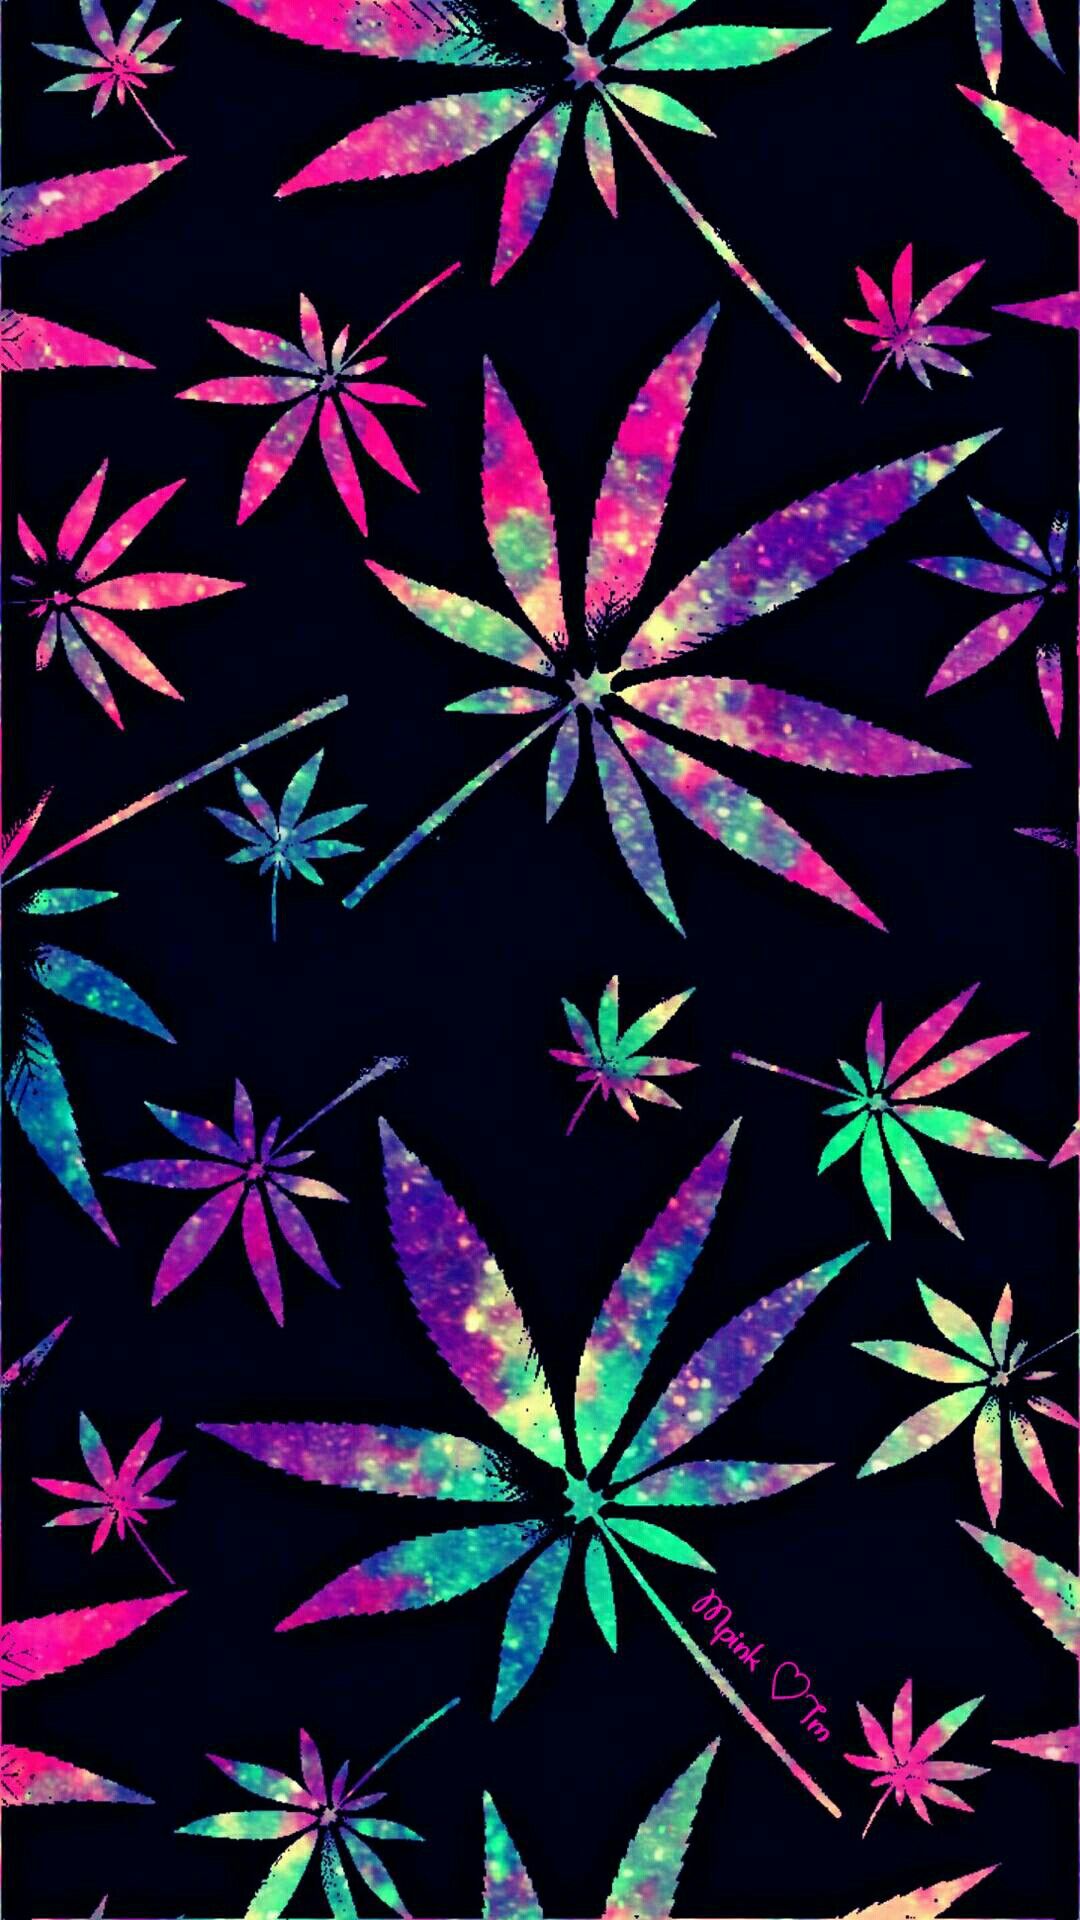 Weed Wallpapers - KoLPaPer - Awesome Free HD Wallpapers